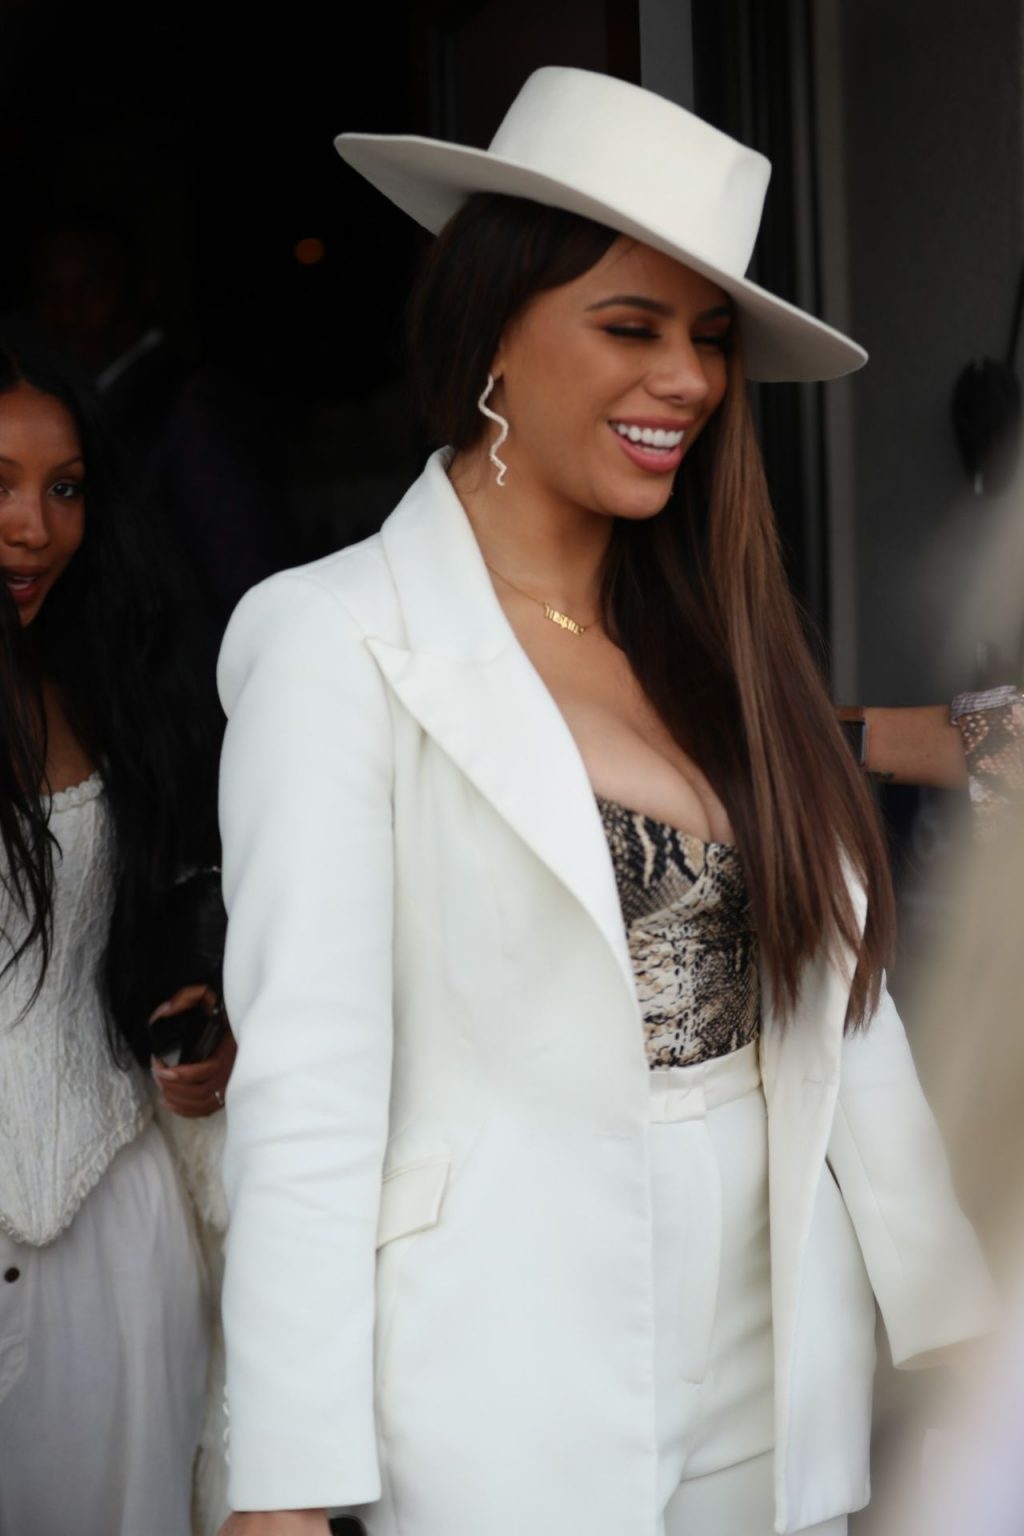 Dinah Jane Departs the Women in Harmony pre-Grammy Luncheon (35 Photos + Video)